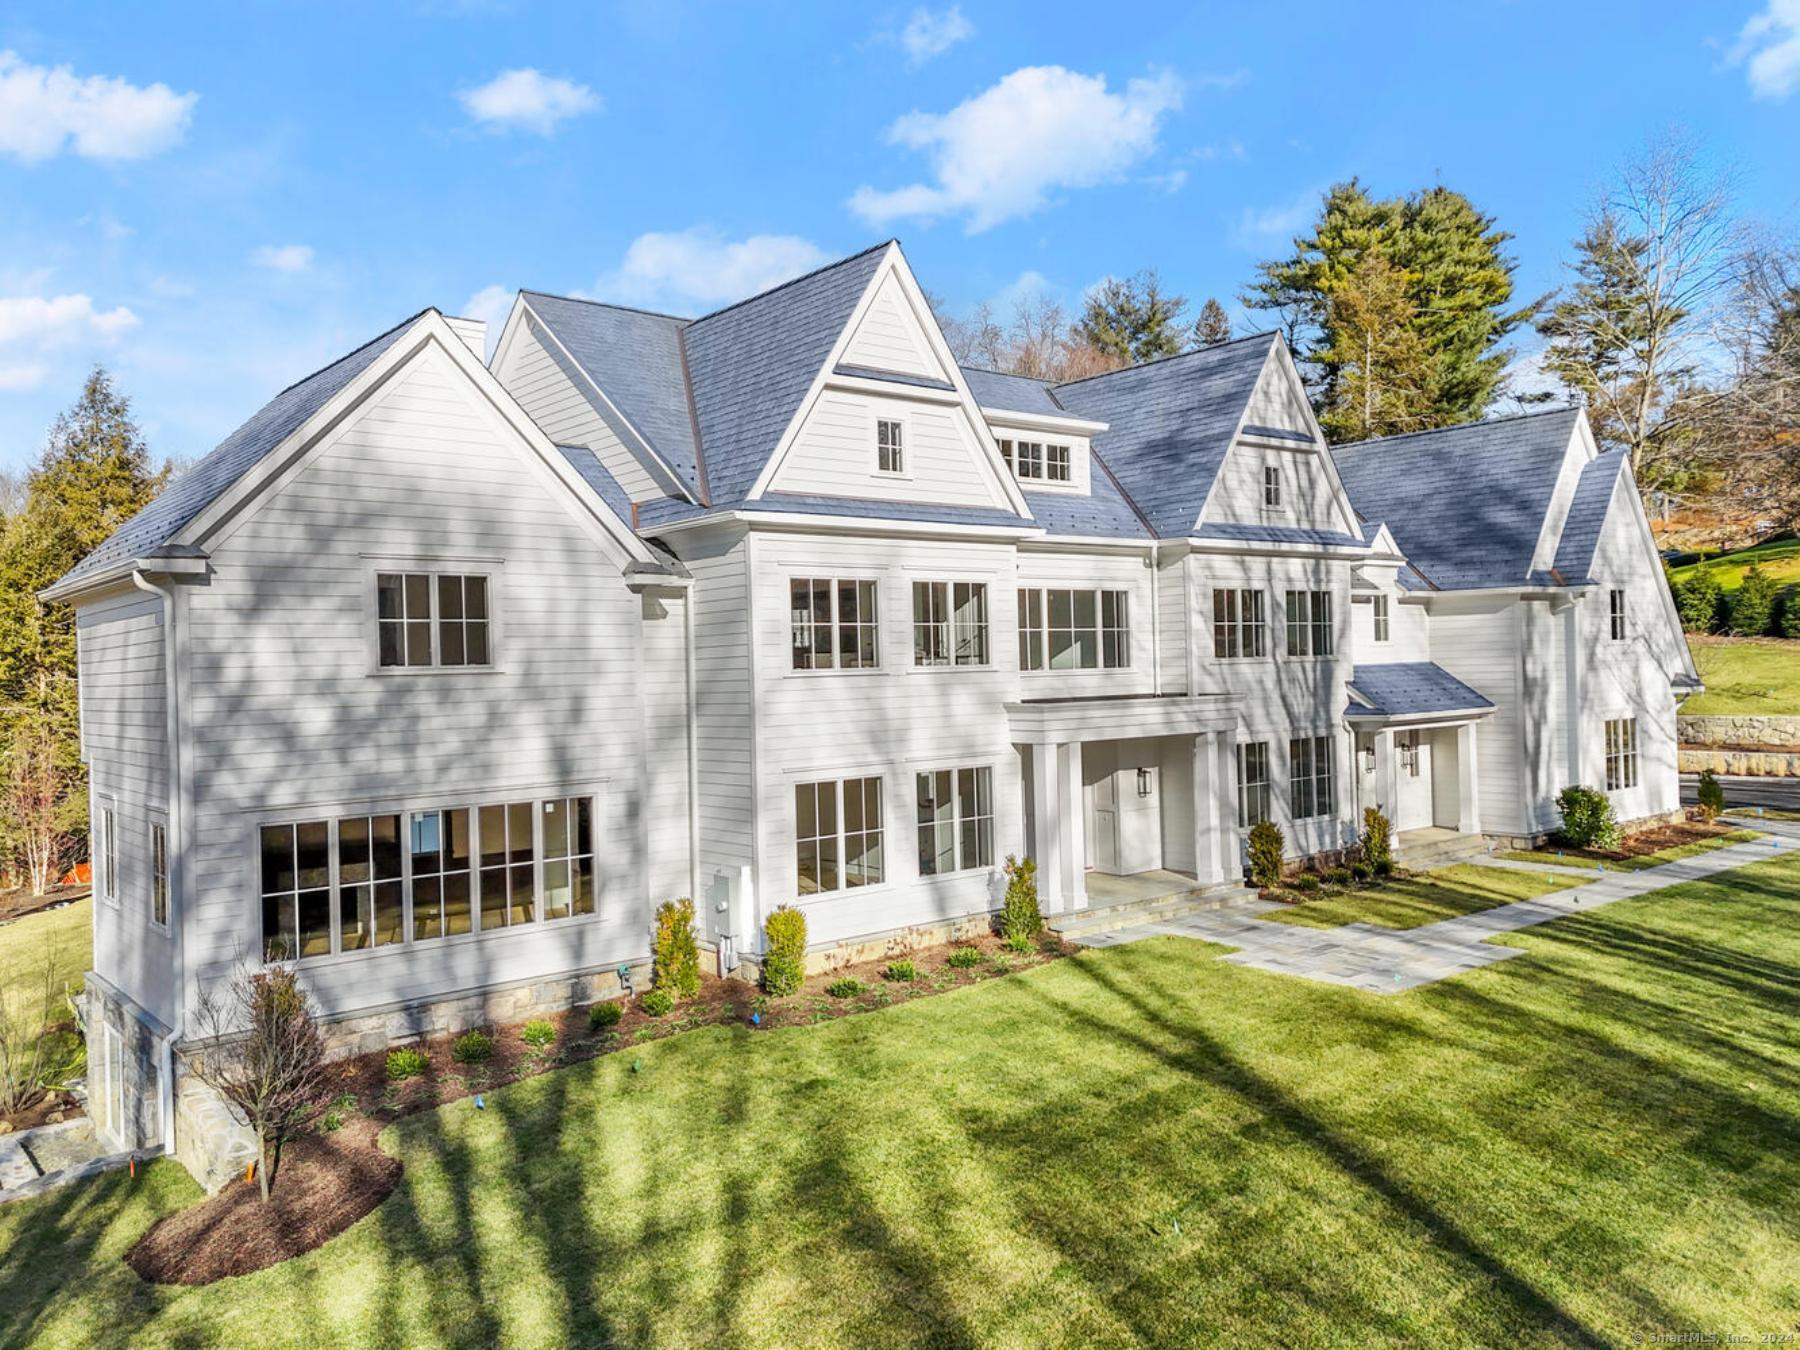 99 Turtle Back Road, New Canaan, Connecticut - 6 Bedrooms  
7.5 Bathrooms  
16 Rooms - 